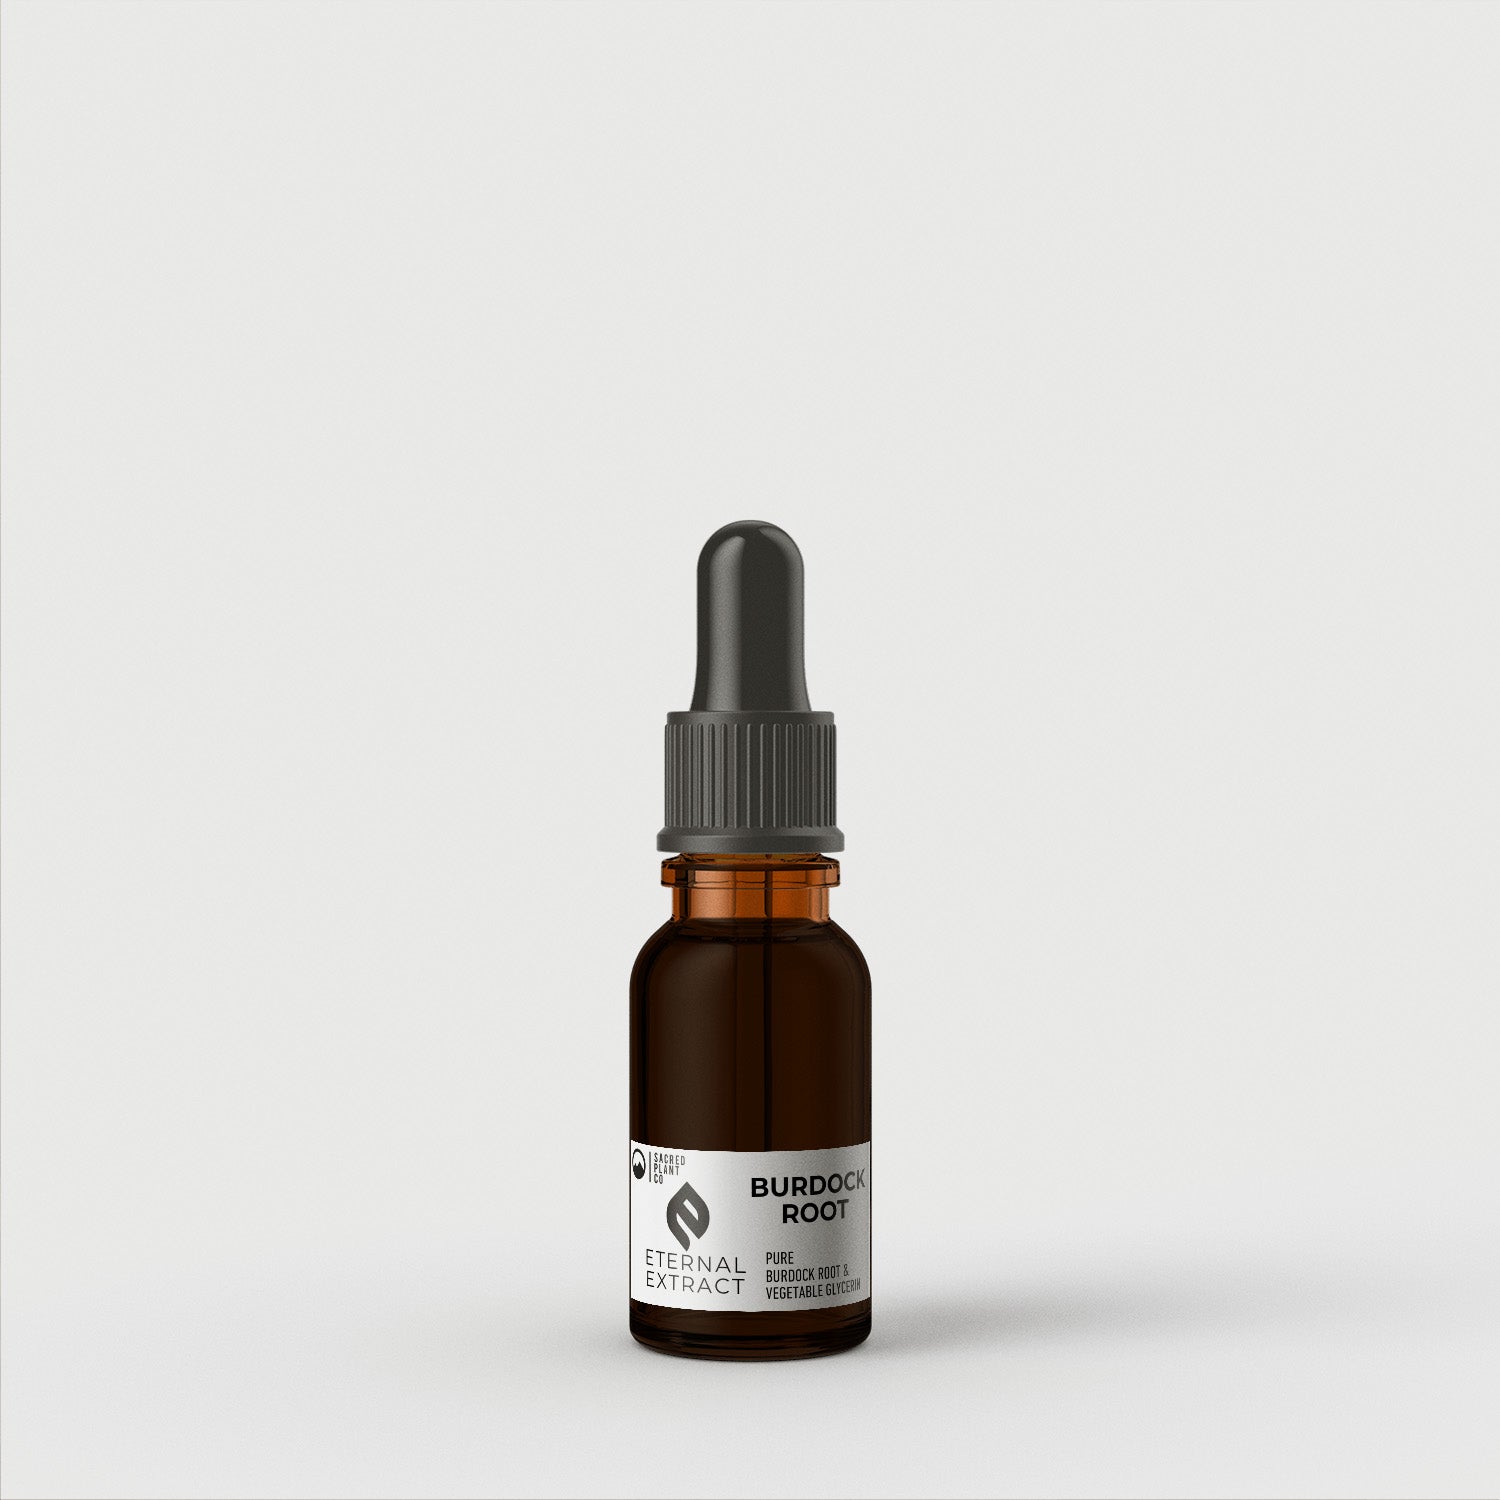 A 15ml bottle of Sacred Plant Co&